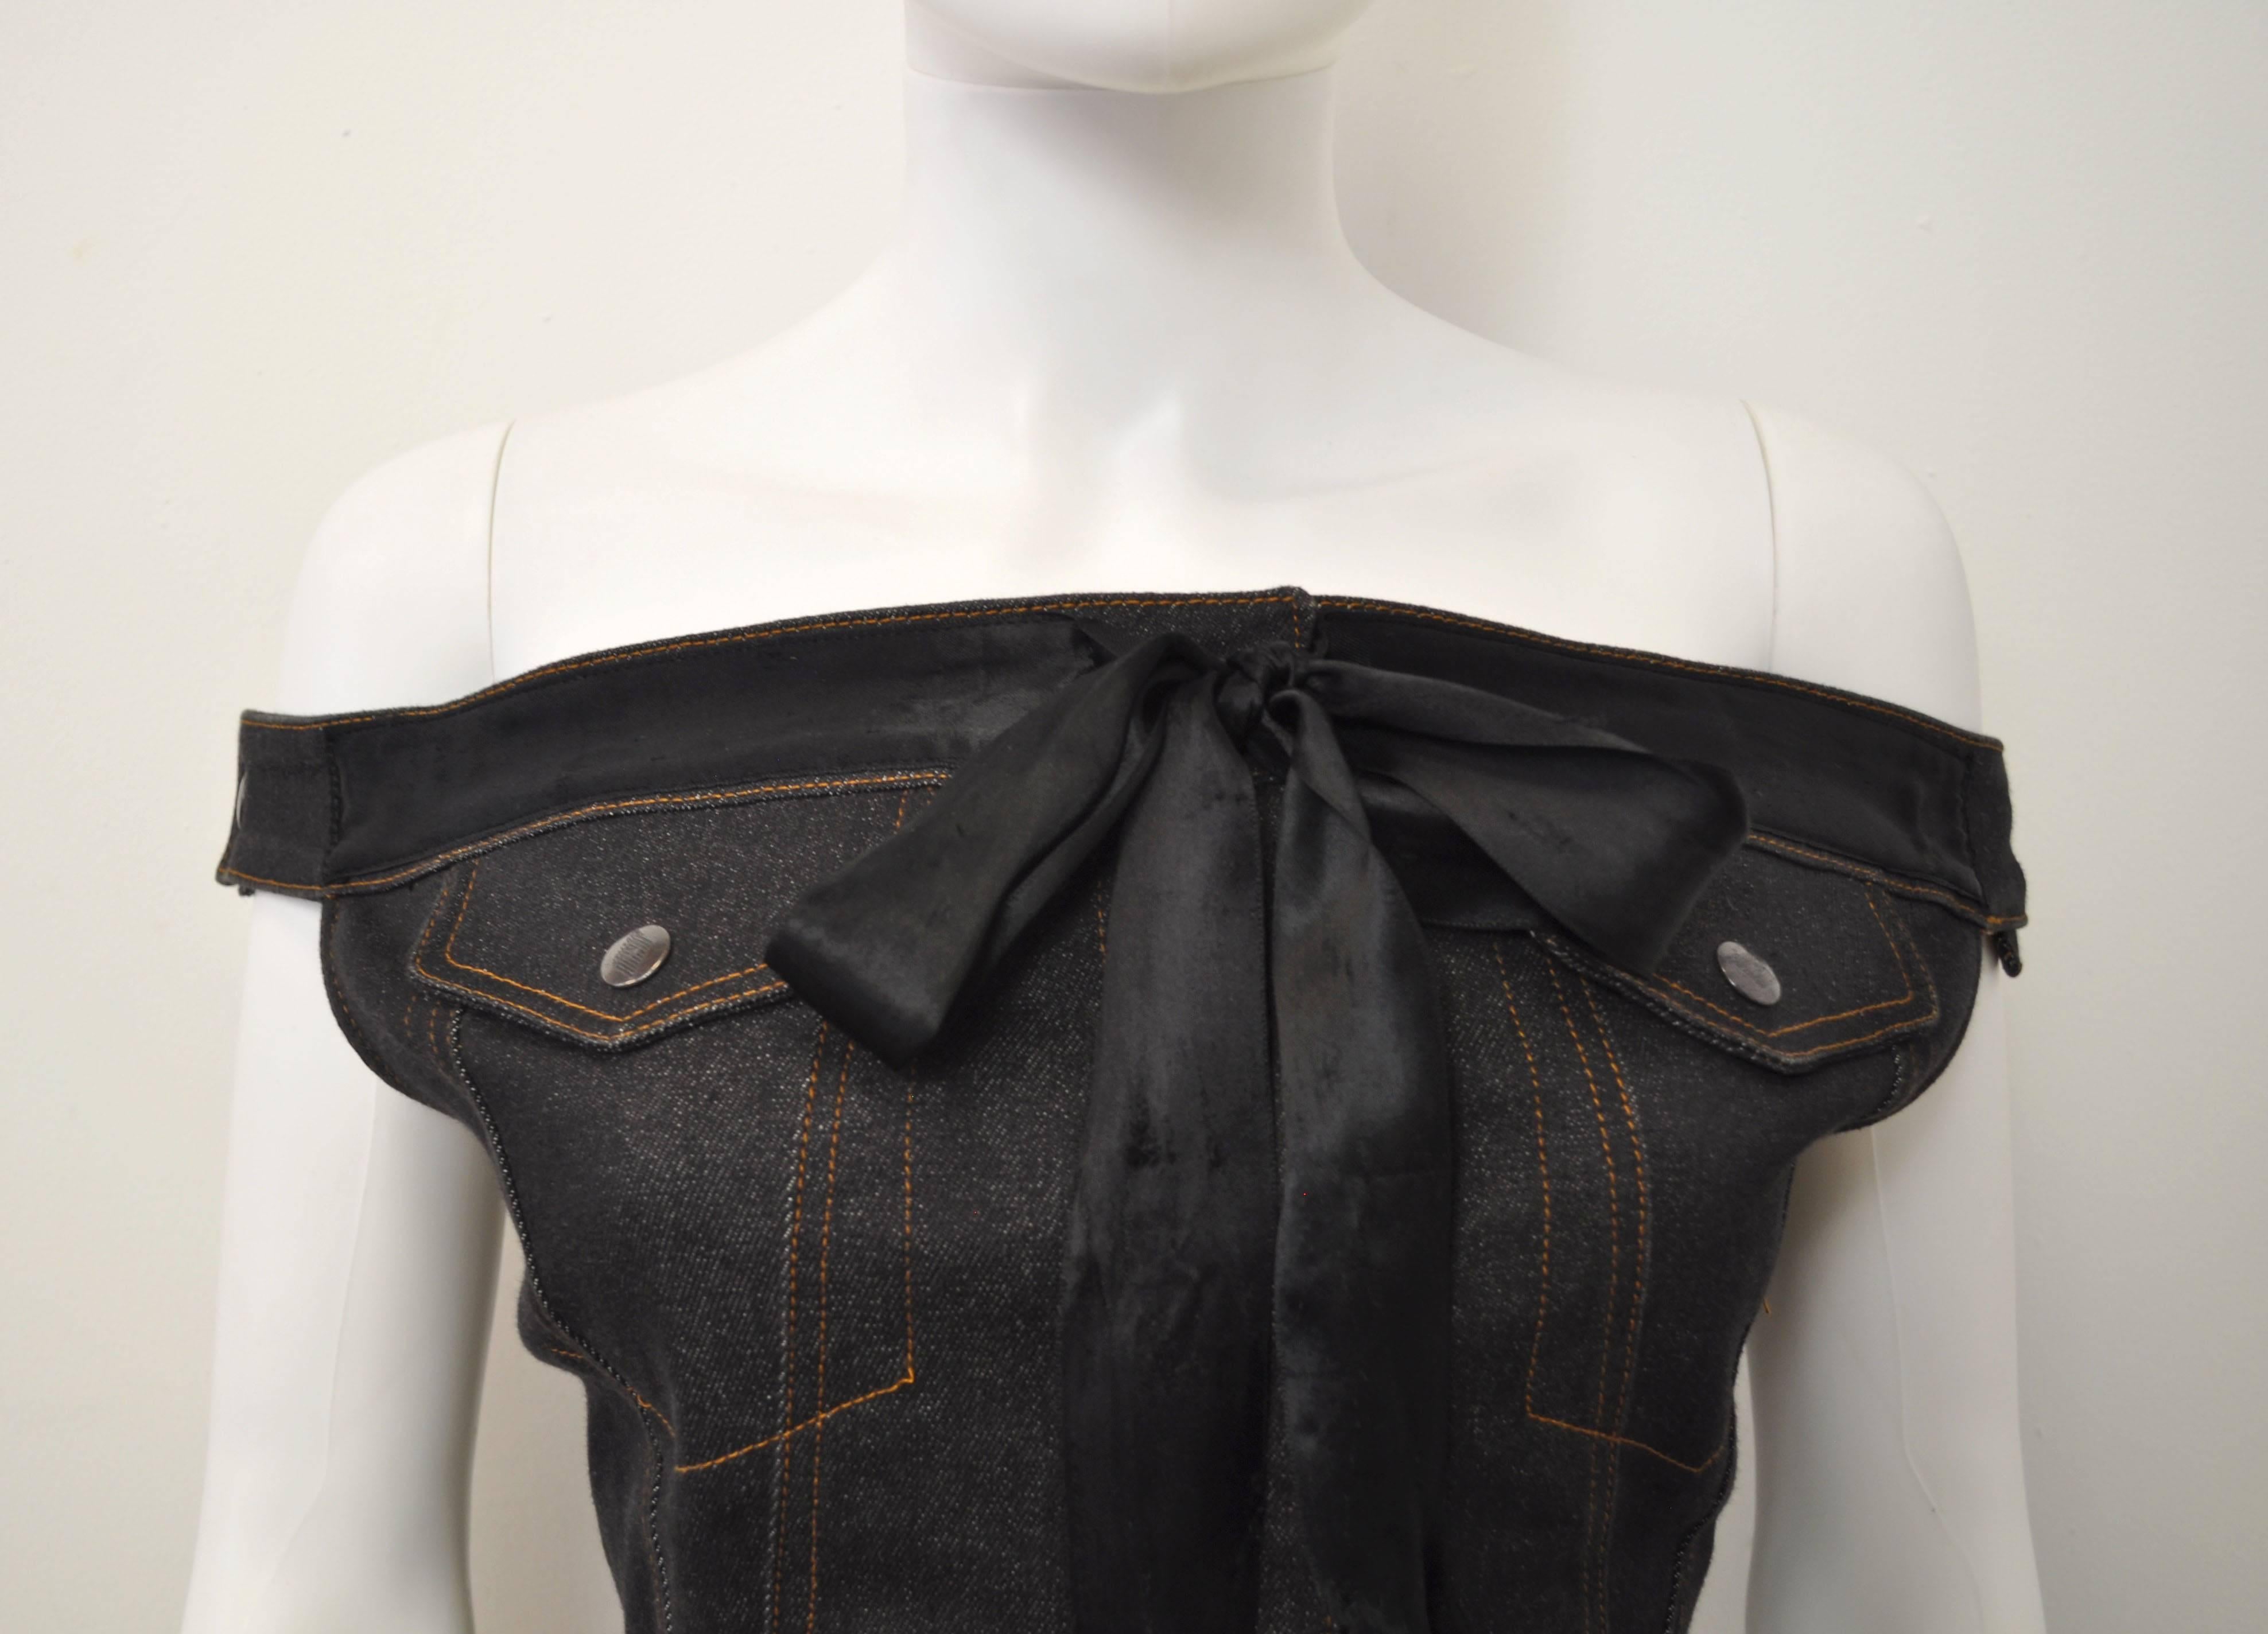 1987 Jean-Paul Gaultier Junior  deconstructed ‘Victorian Jean Jacket’ corset top featured in The Face Magazine 

This fabulous top is from Jean-Paul Gaultiers Junior line. The top dates back to 1987 and was featured in the November issue of The